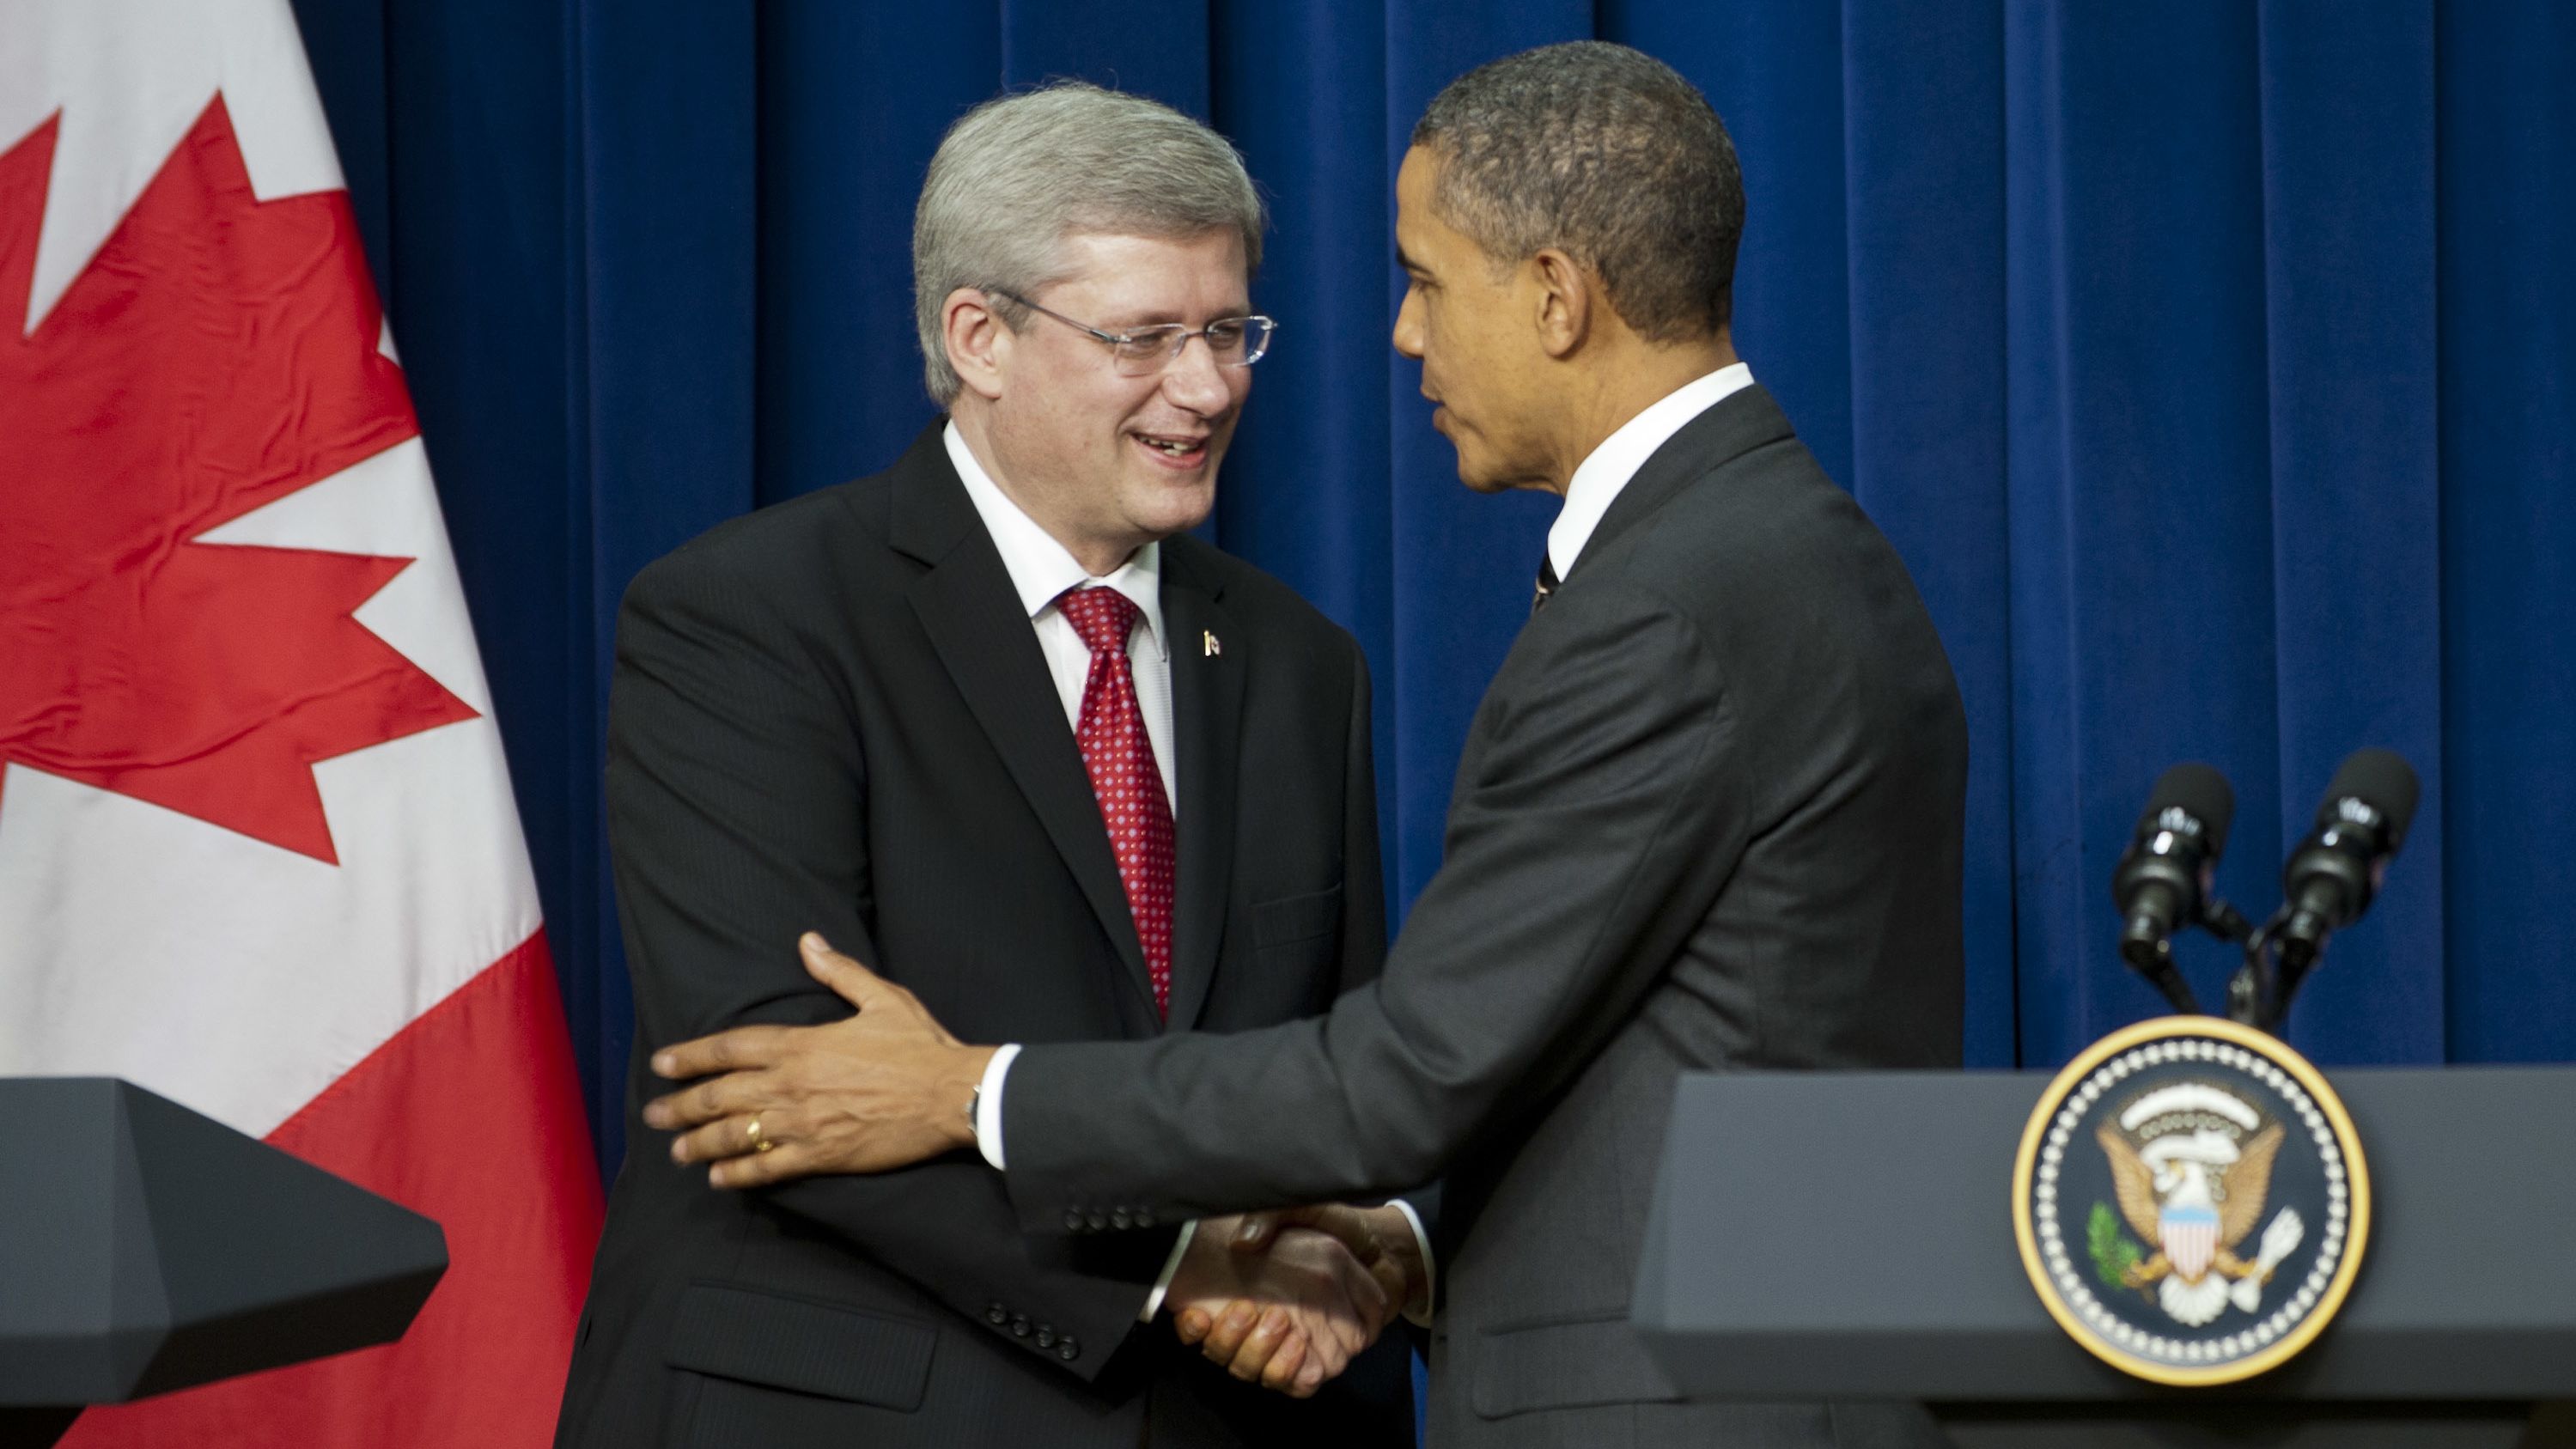 Canadian Prime Minister Stephen Harper, here with President Obama in 2011, has achieved remarkable things, David Frum says.